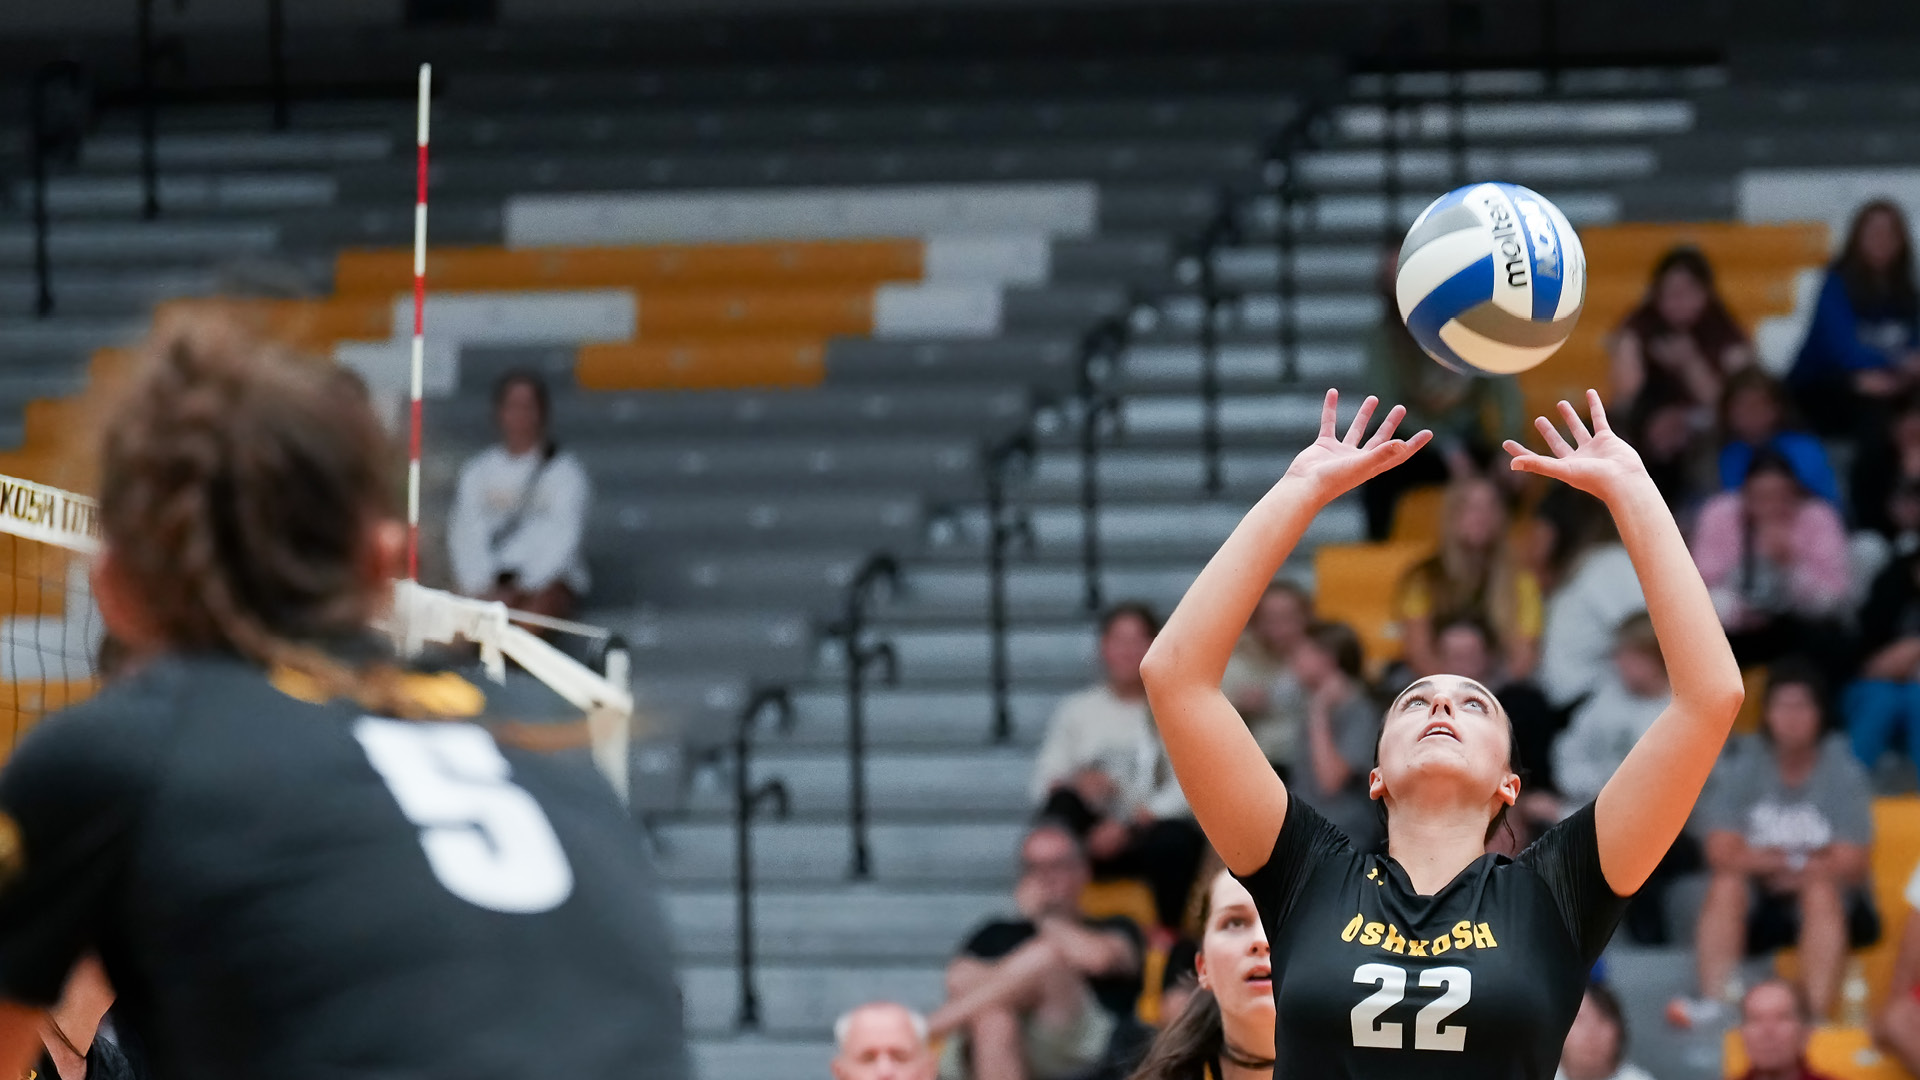 Izzy Coon set a career-high with 32 assists against Northwestern